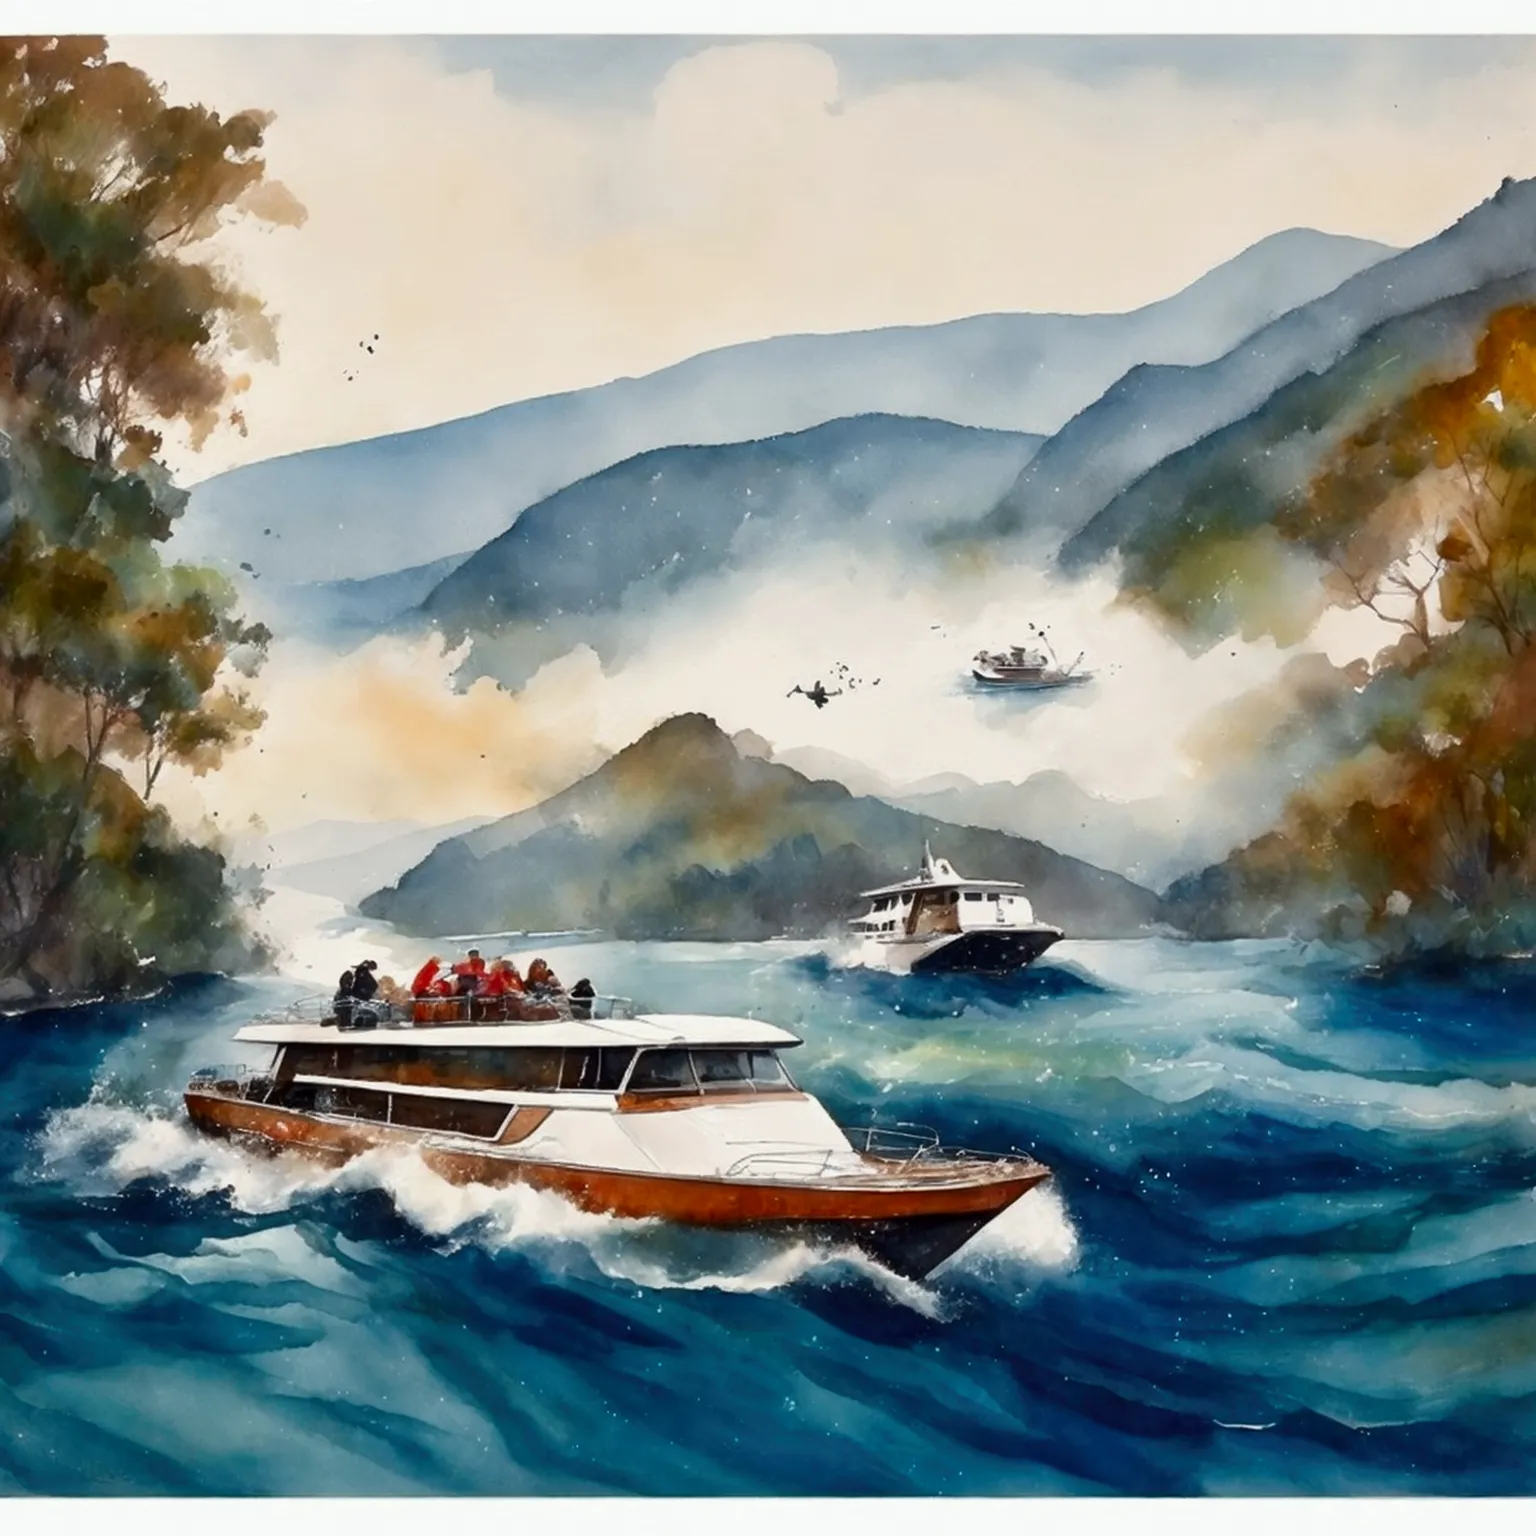 The image shows a group of people on a boat navigating a river surrounded by lush greenery and rocky terrain. The passengers, we...